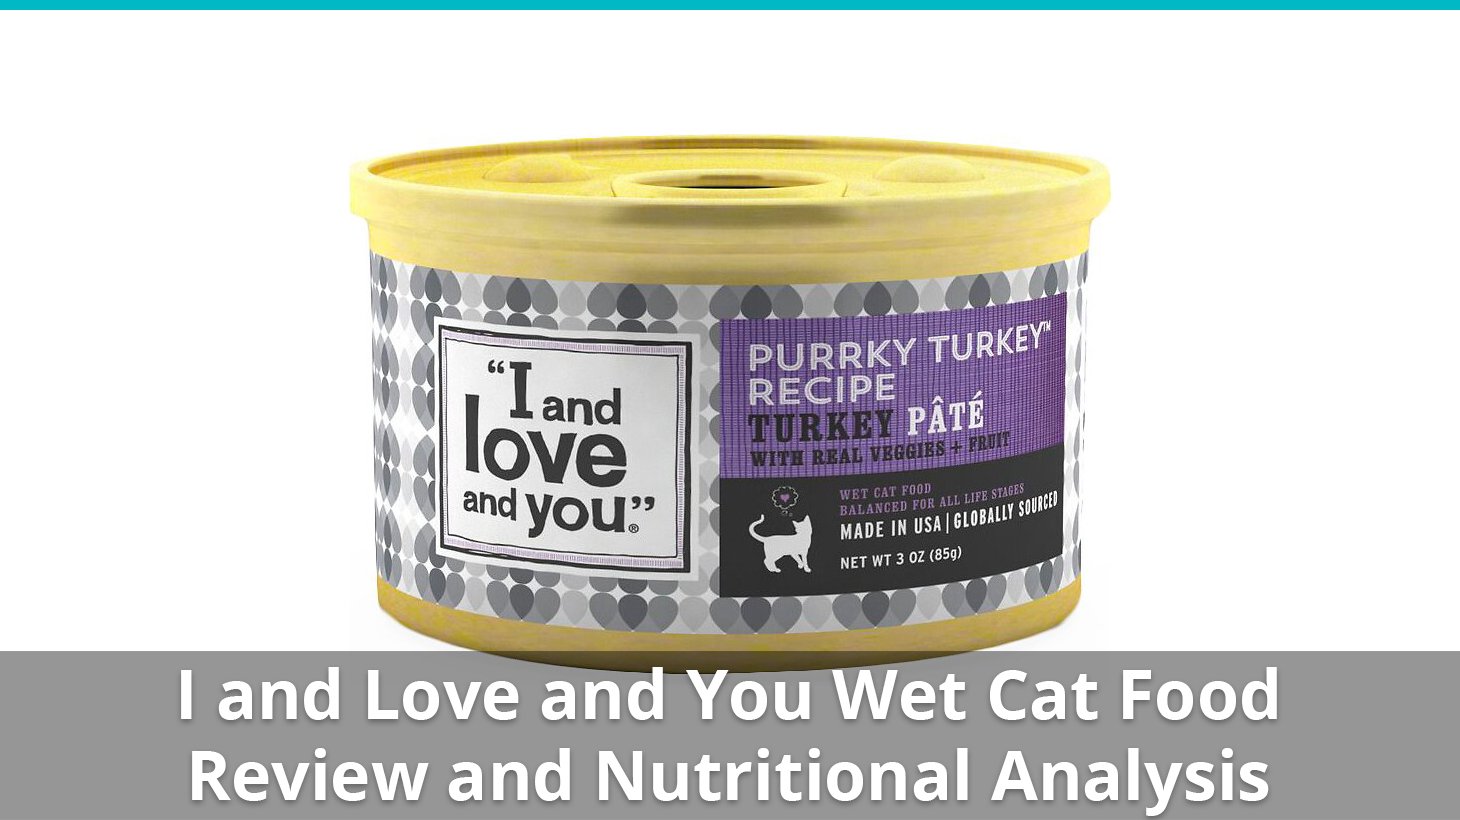 i and love and you wet cat food